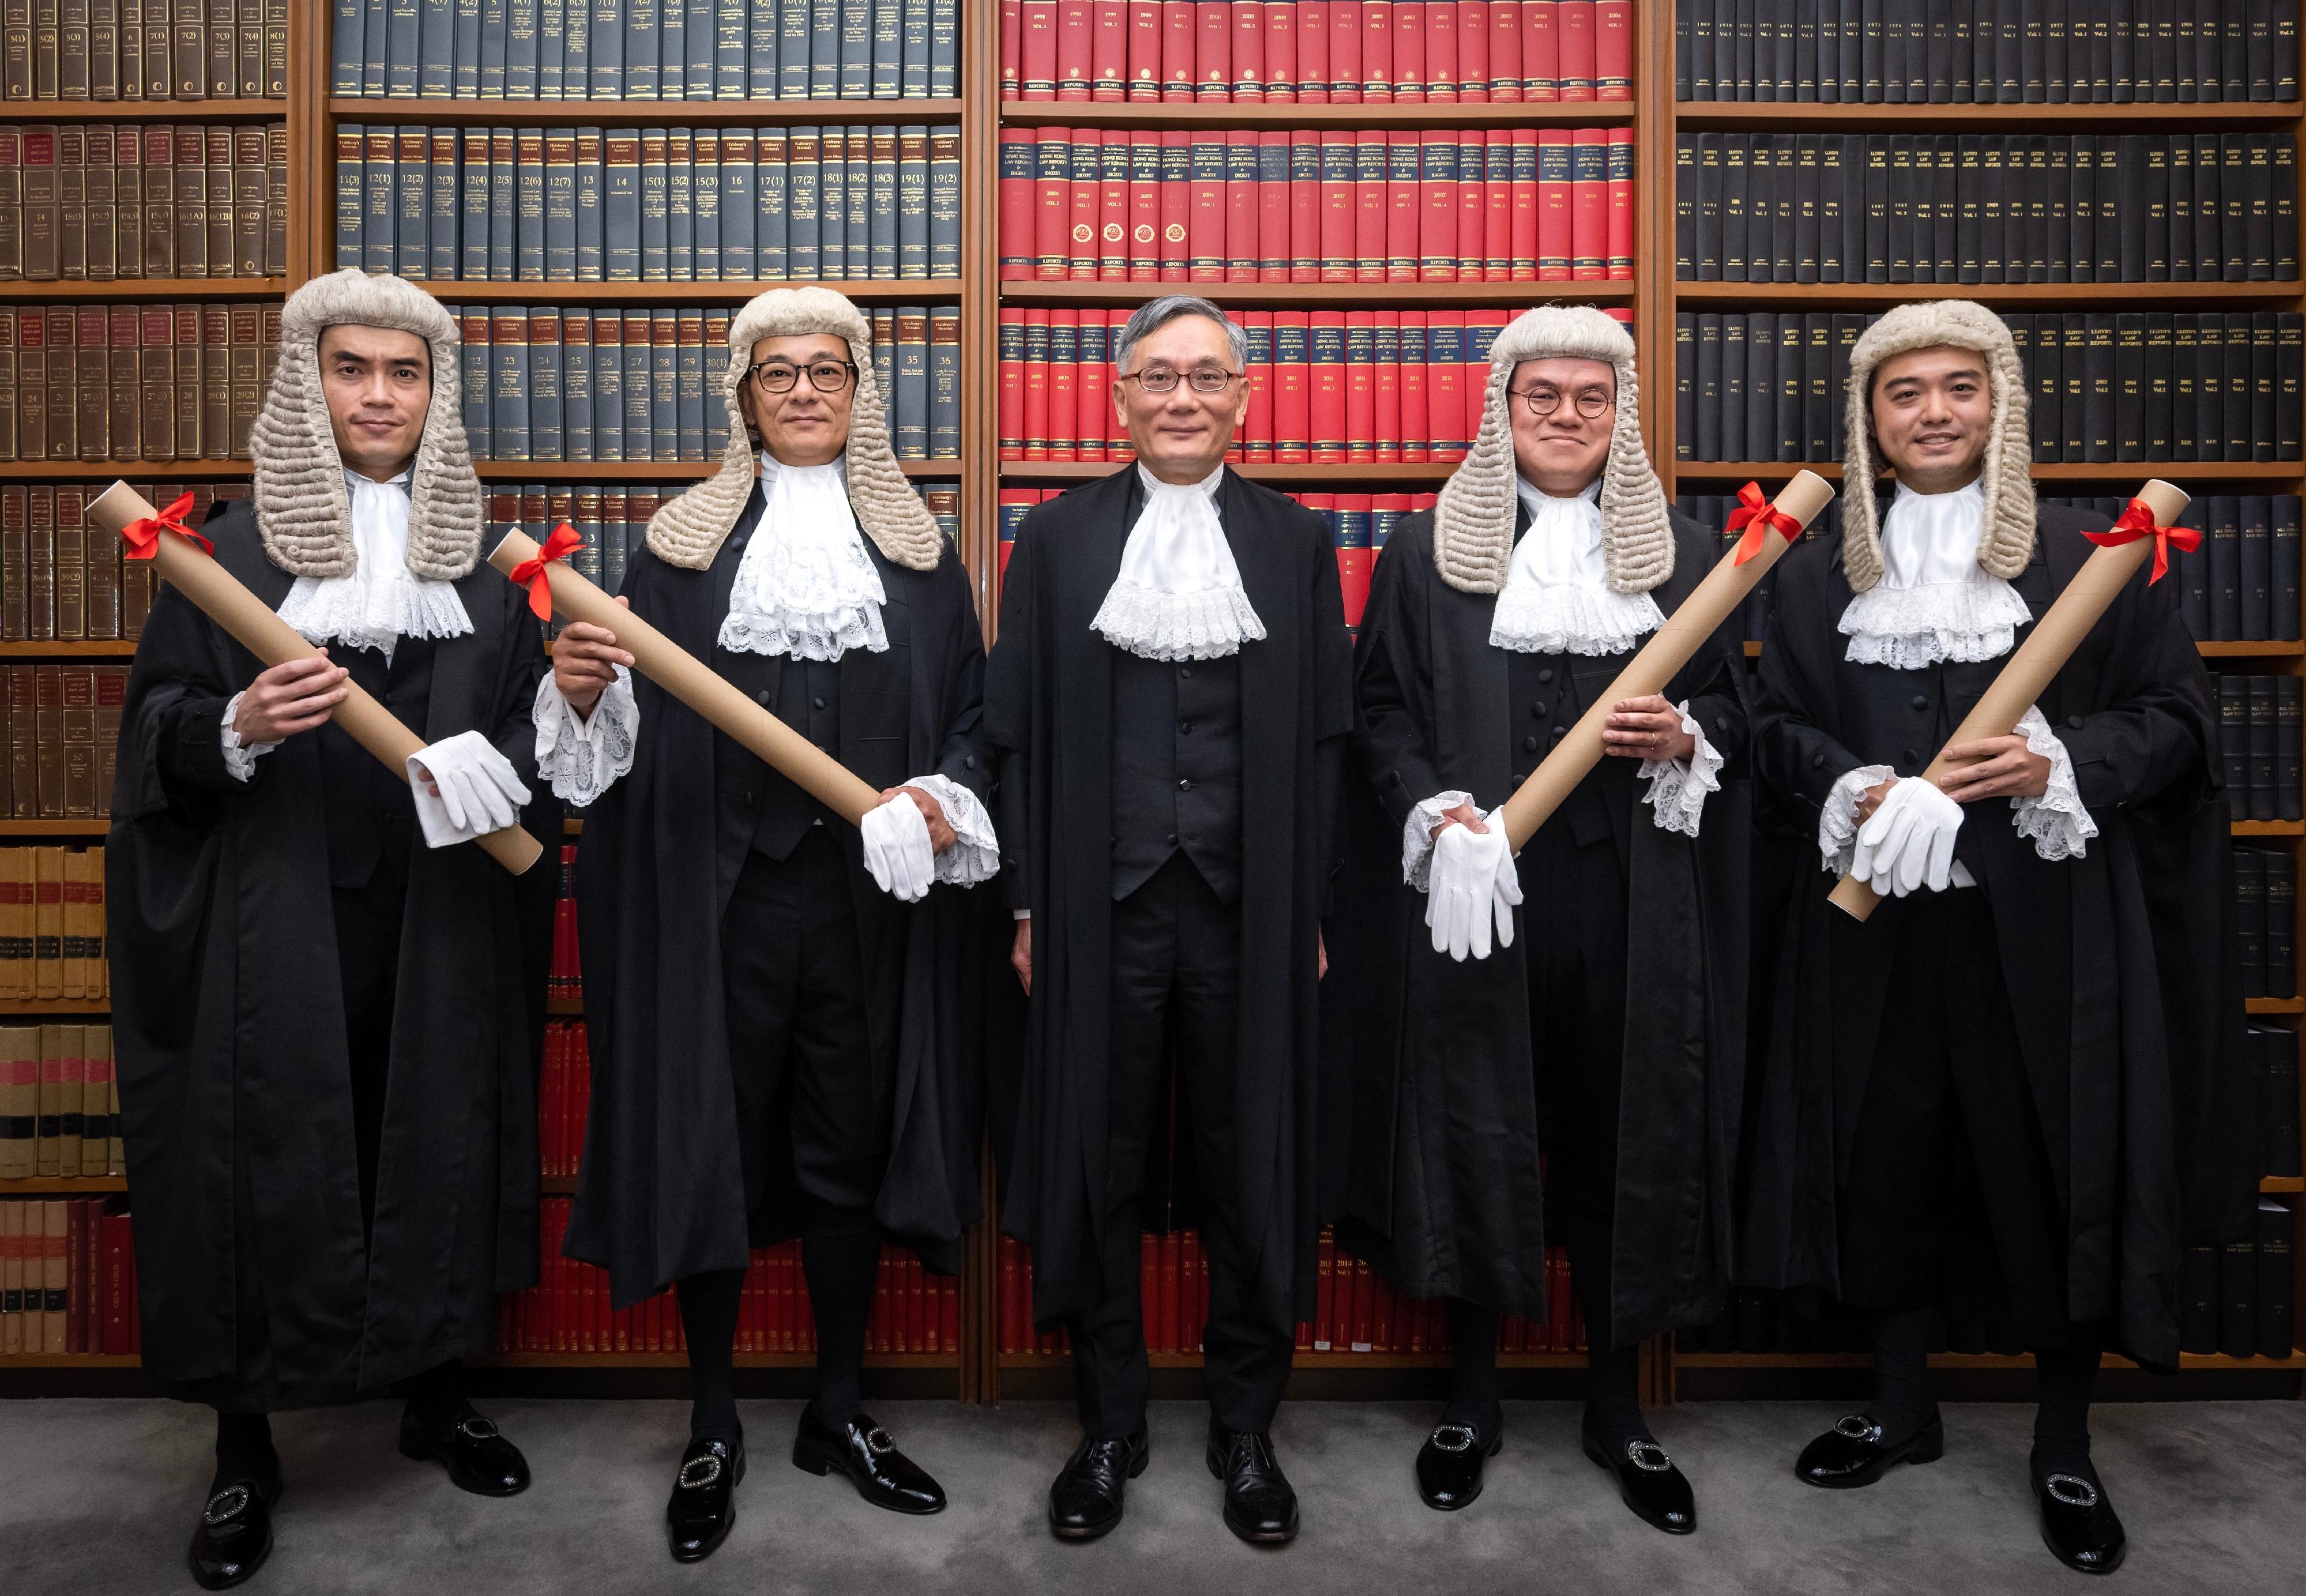 The ceremonial proceedings for the admission of the newly appointed Senior Counsel took place at the Court of Final Appeal today (May 20). Photo shows the Chief Justice of the Court of Final Appeal, Mr Andrew Cheung Kui-nung (centre), with the newly appointed Senior Counsel Mr Bruce Tse Chee-ho (second left), Mr Anthony Chan Ho-ki (second right), Mr Mike Lui Sai-kit (first left), and Mr Christopher Chain Siao-liang (first right).